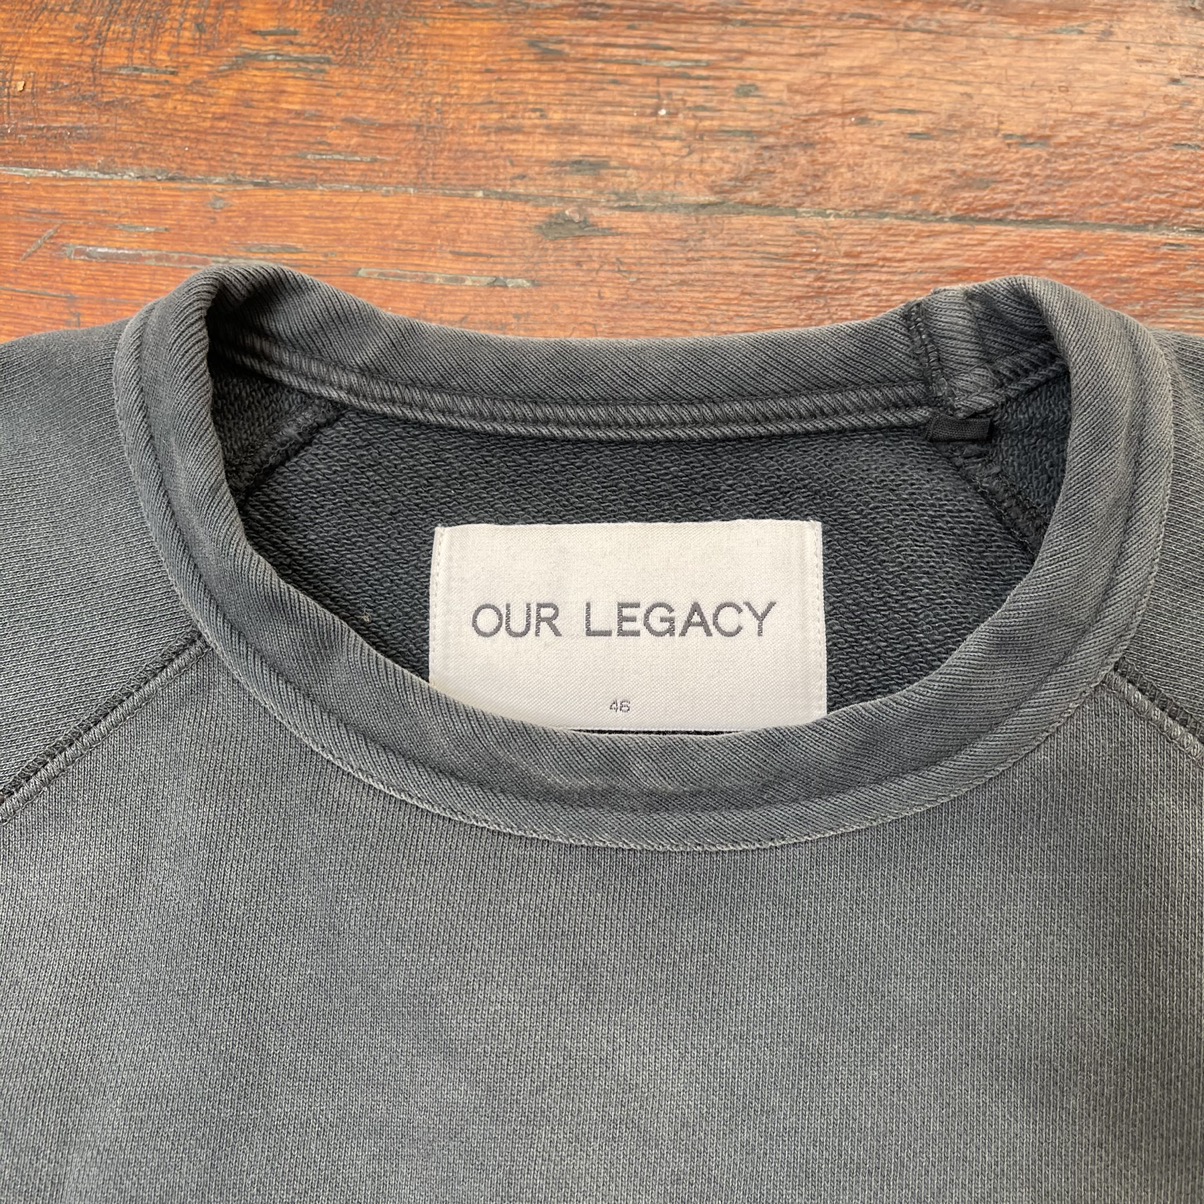 Our Legacy Overdyed Crewneck - 2